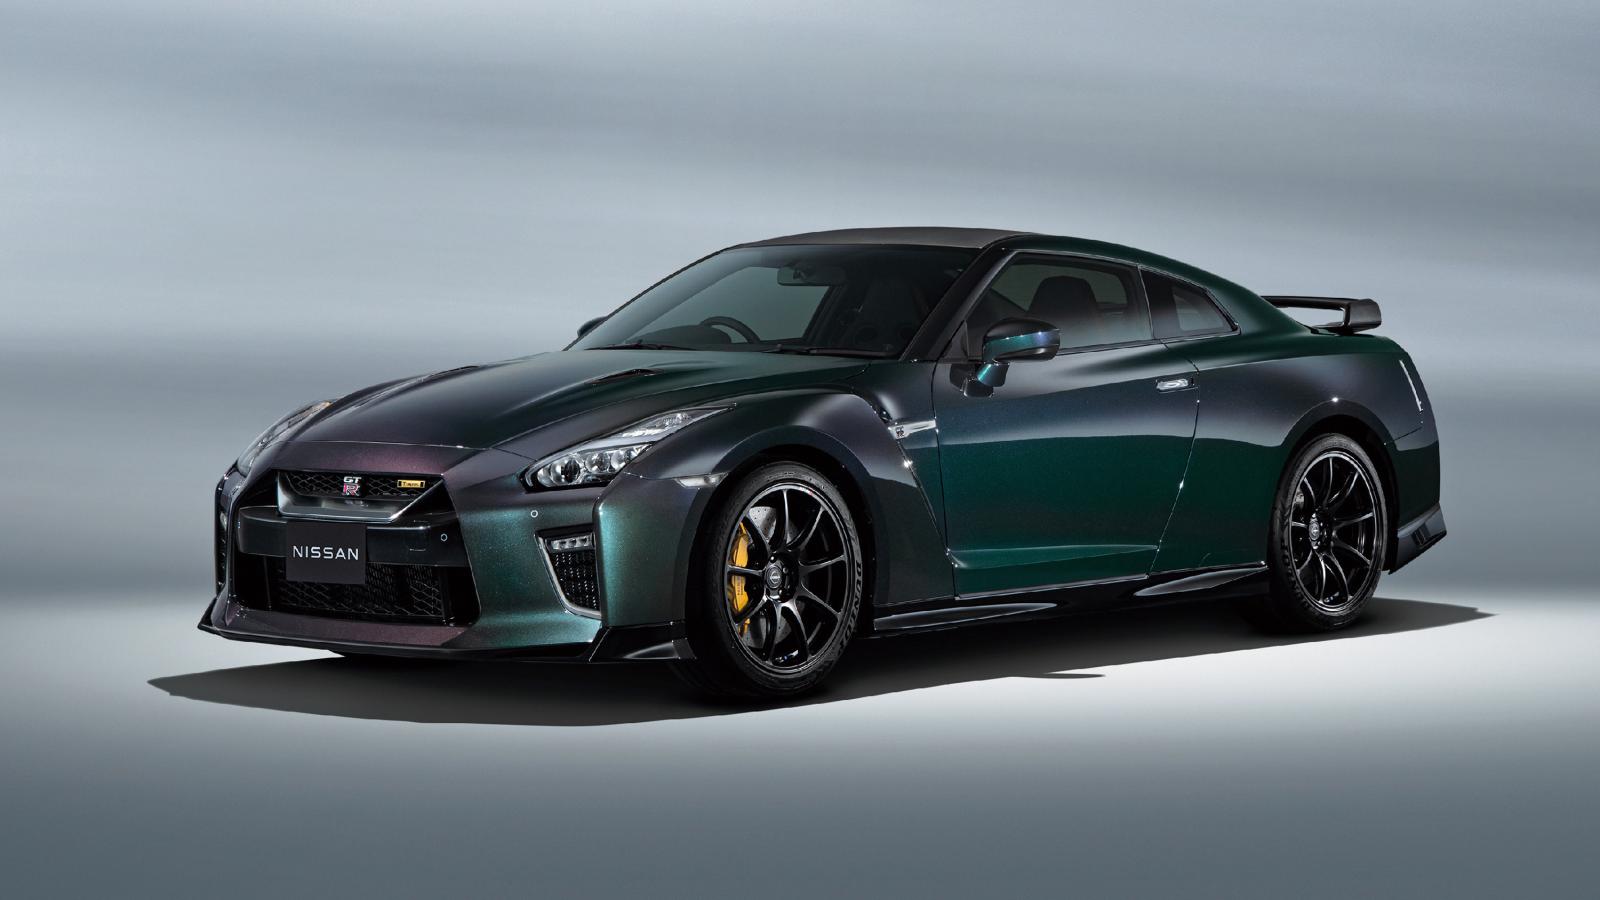 A Full Collection Of Nissan GT-R Colors You Need To See Right Away!